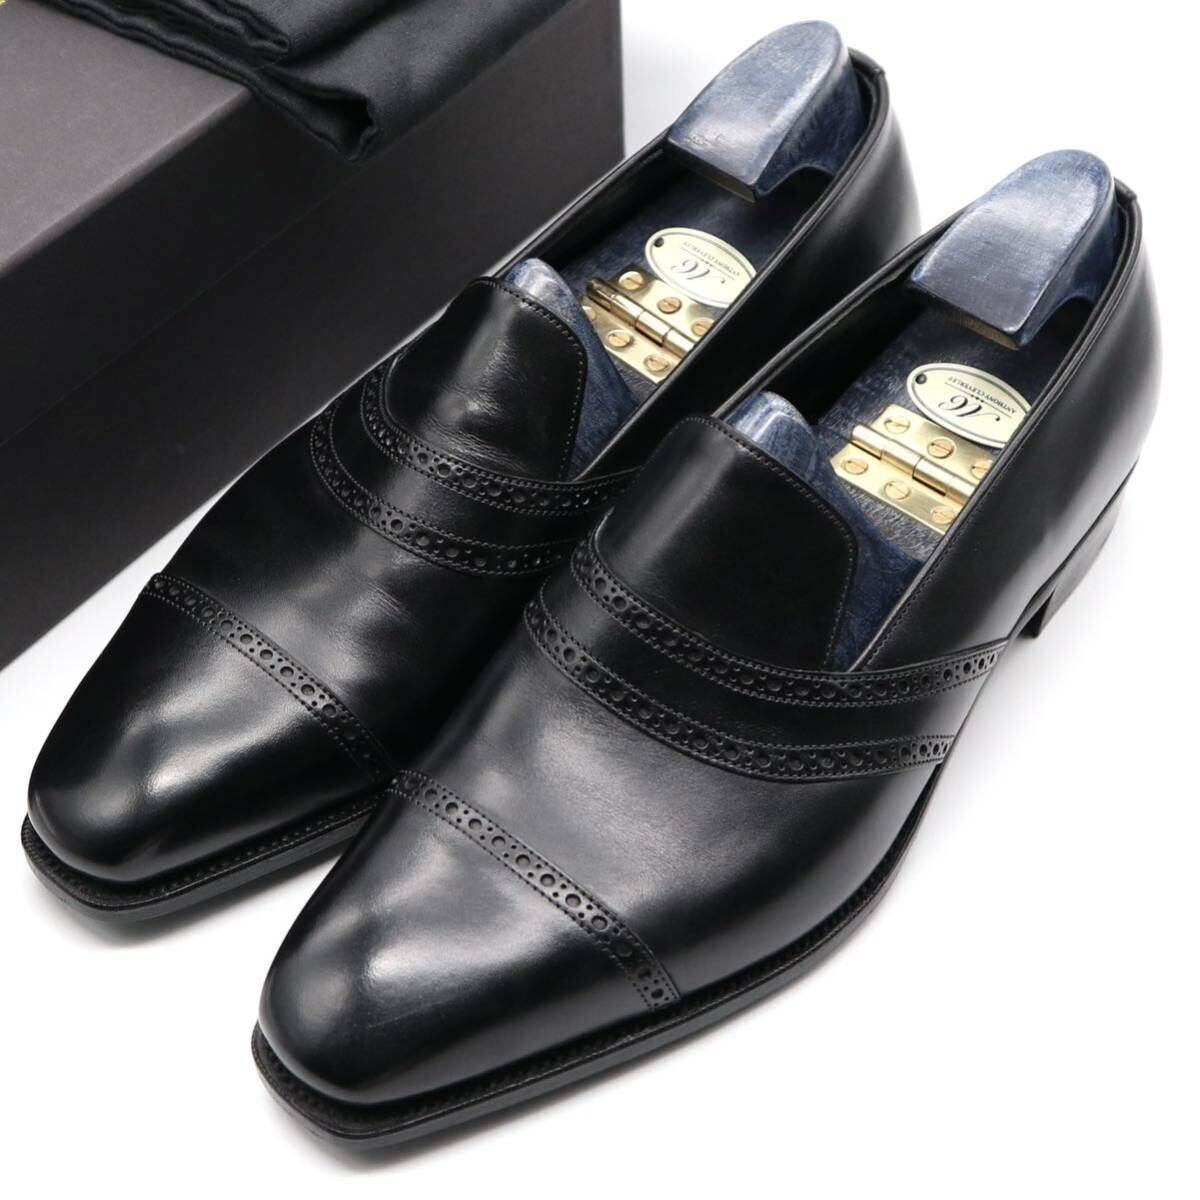  new goods ANTHONY CLEVERLEY punch do cap slip-on HAGUE 7.5F regular price 31 ten thousand Anthony kre Bally Loafer John Lobb liking . person .